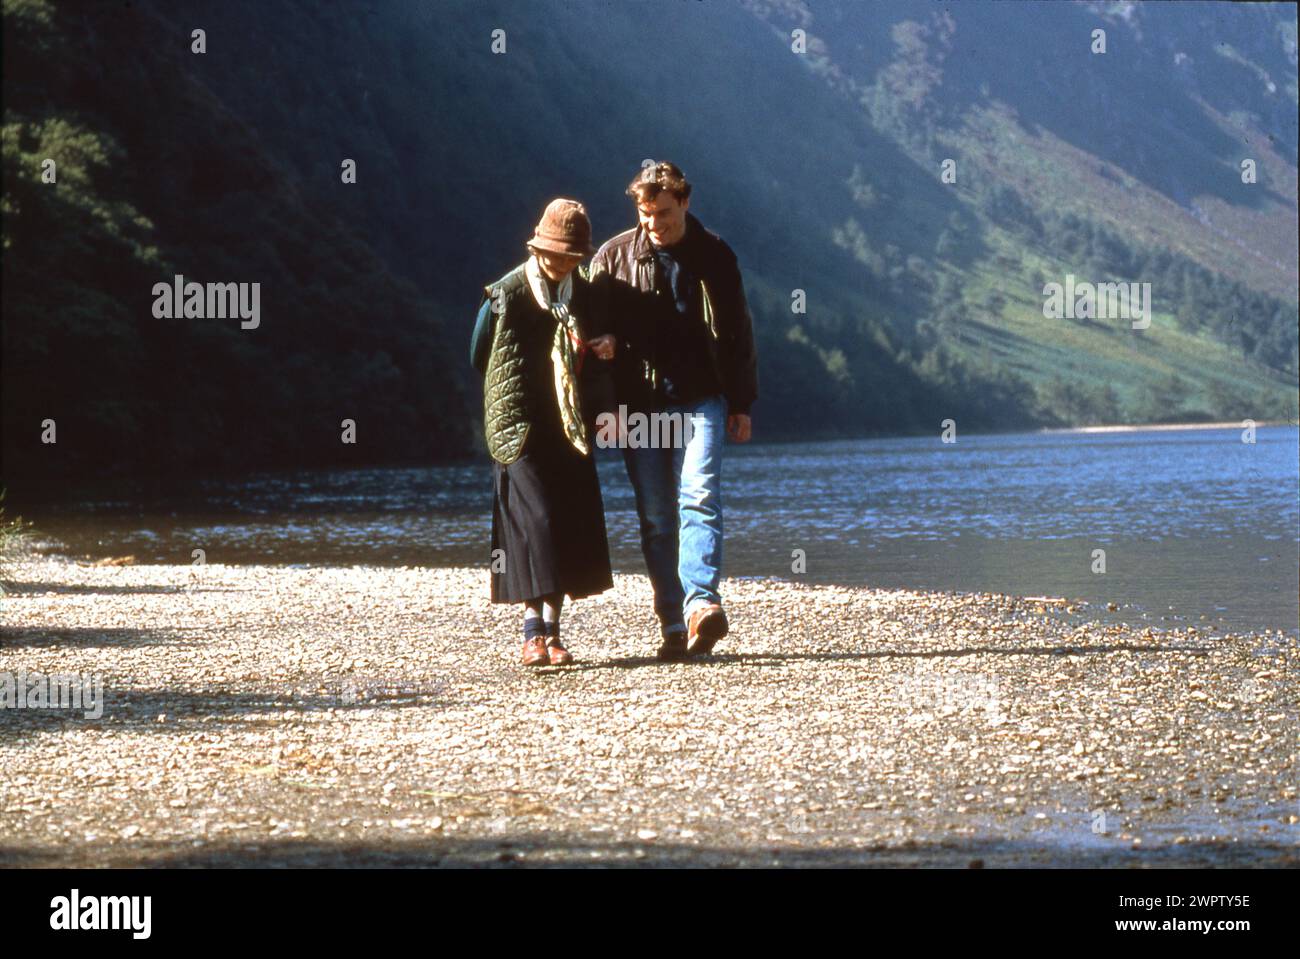 VIRGINIA McKENNA and JESSE BIRDSALL in the TV Movie SEPTEMBER 1996 director COLIN BUCKSEY from the novel by Rosamunde Pilcher music Richard Hartley costume design Florence Nicaise British Sky Broadcasting (BSkyB) / Hall mark Entertainment / Portman Hannibal Productions Stock Photo